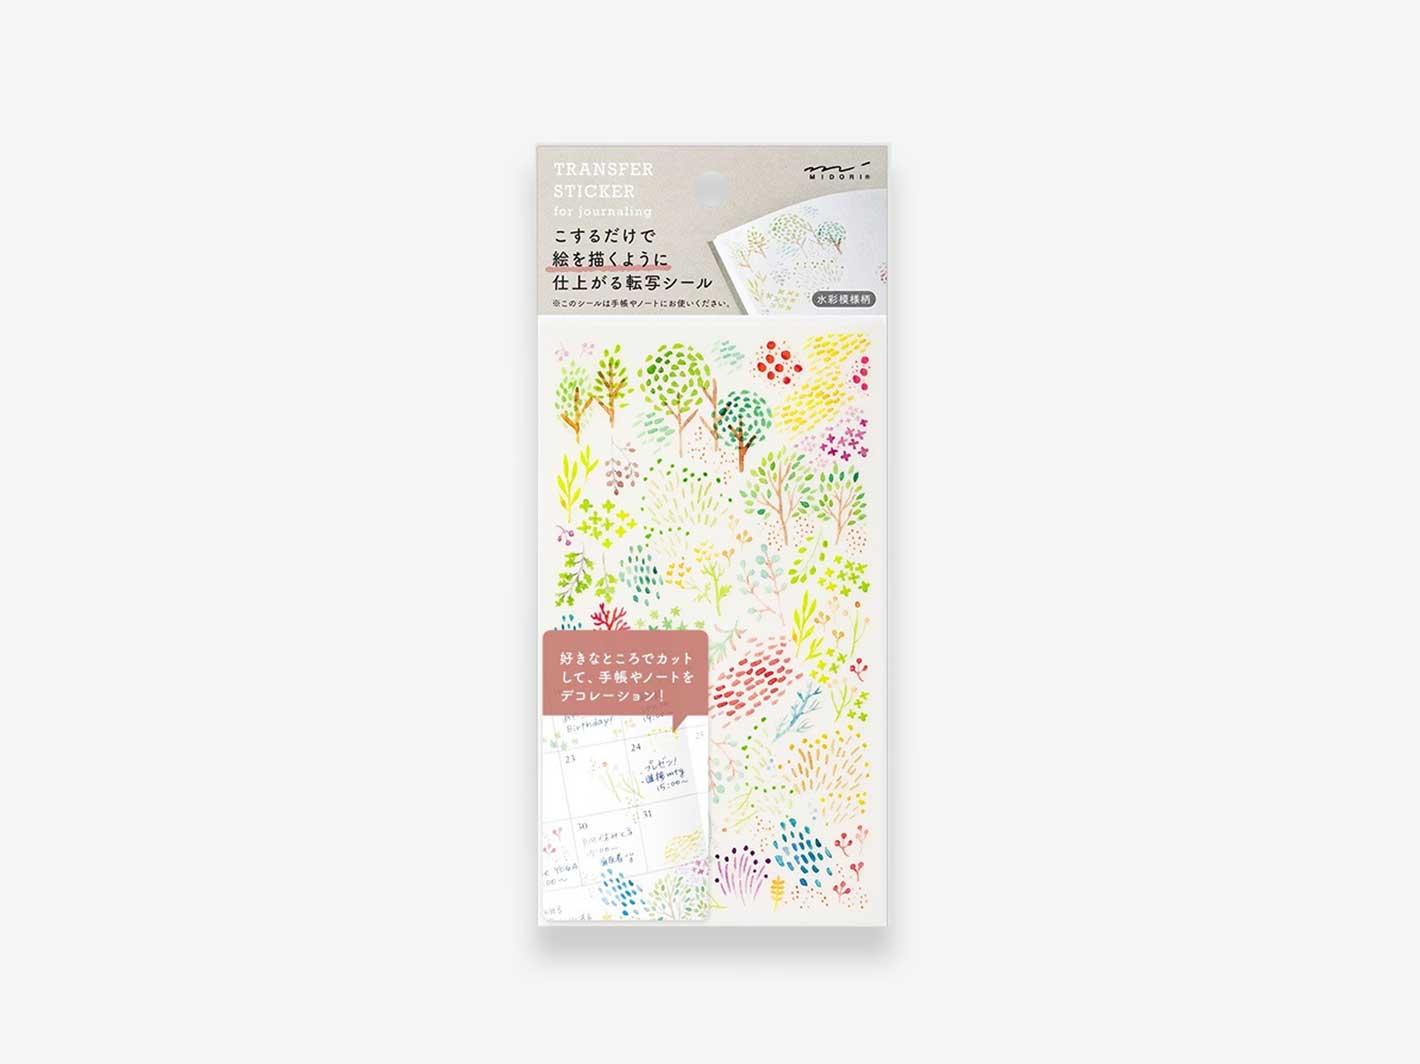 Transfer Stickers Watercolor Patterns